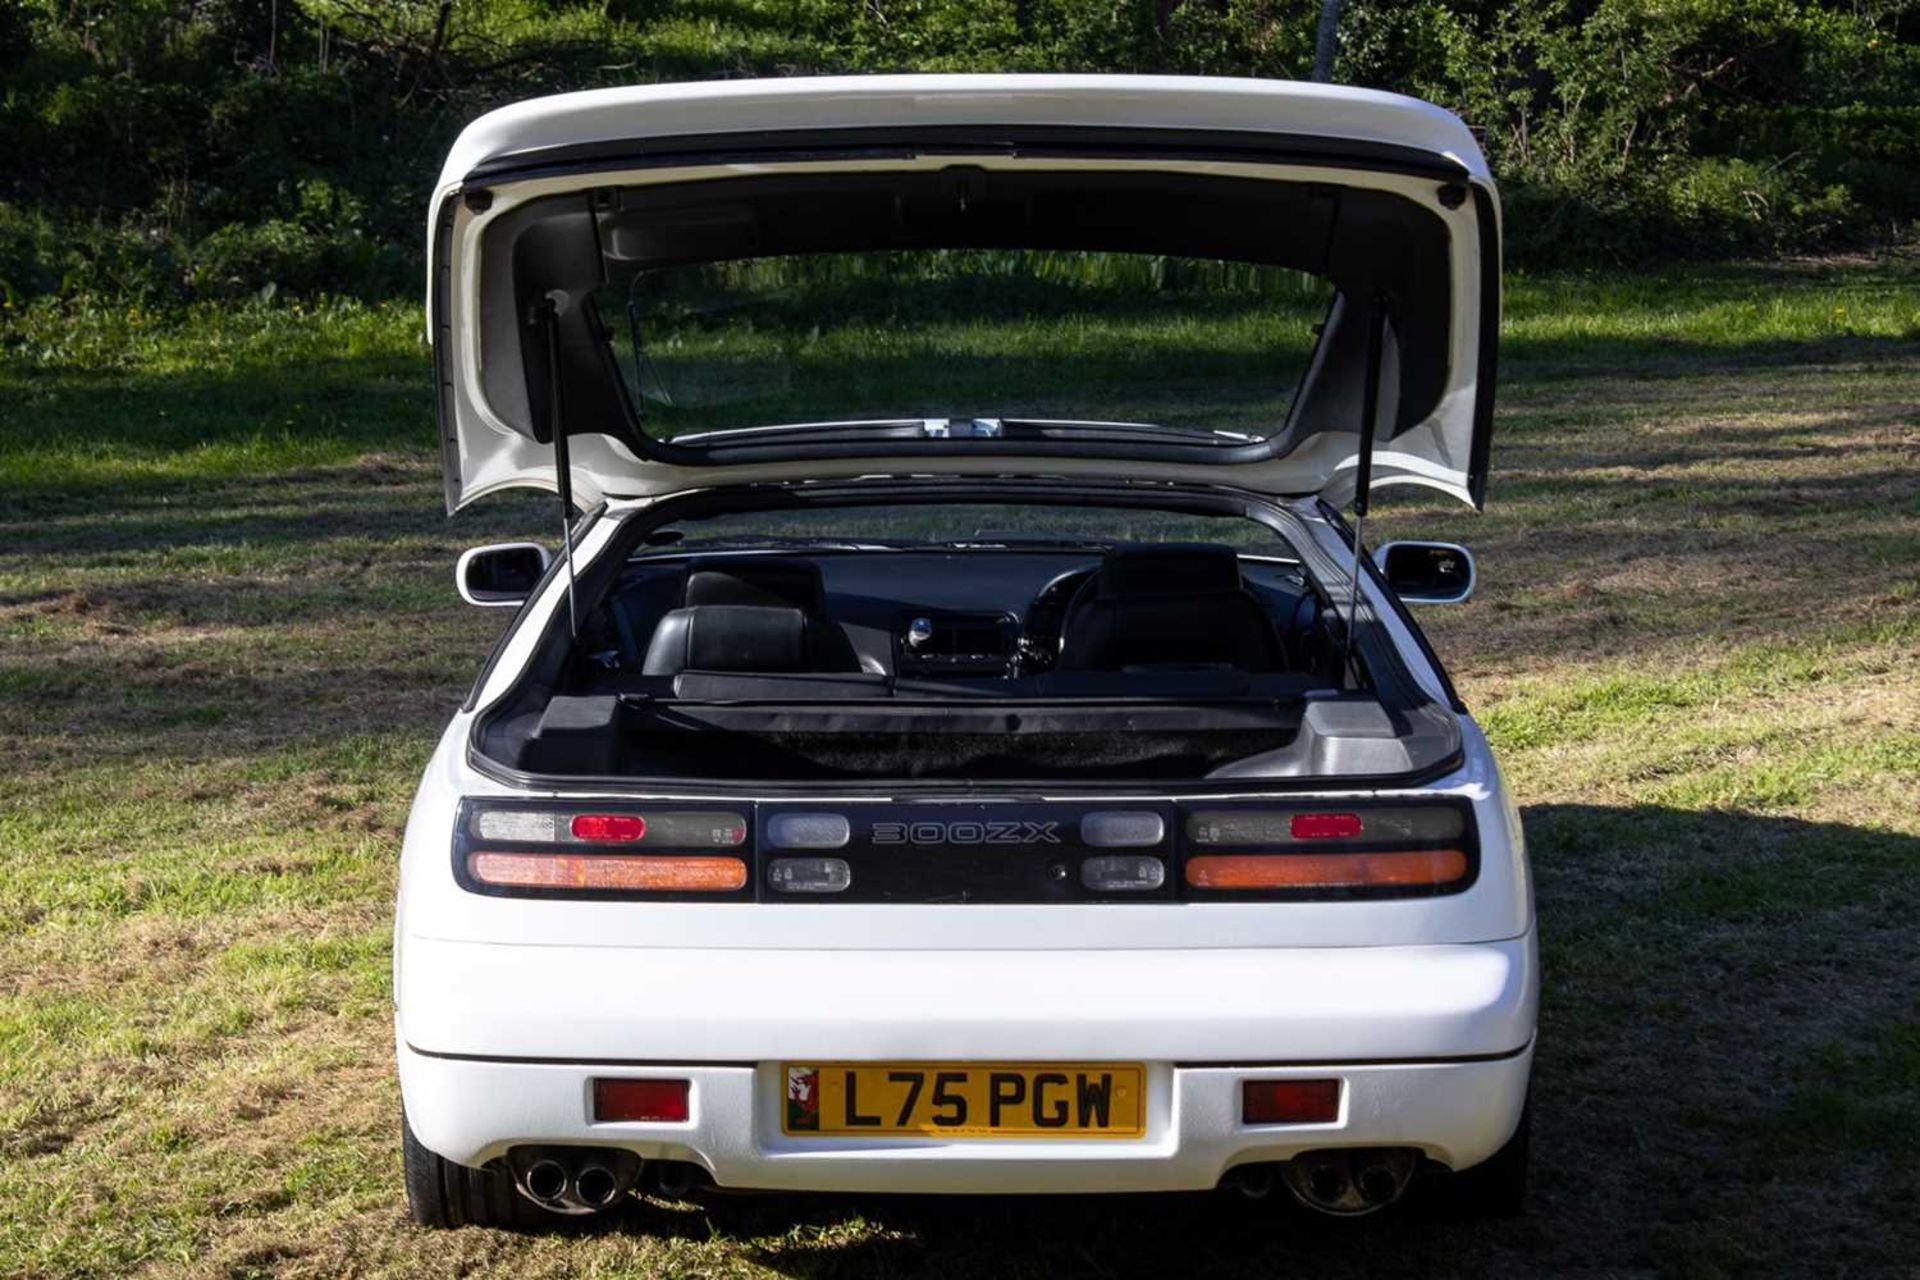 1990 Nissan 300ZX Turbo 2+2 Targa One of the last examples registered in the UK - Image 81 of 89